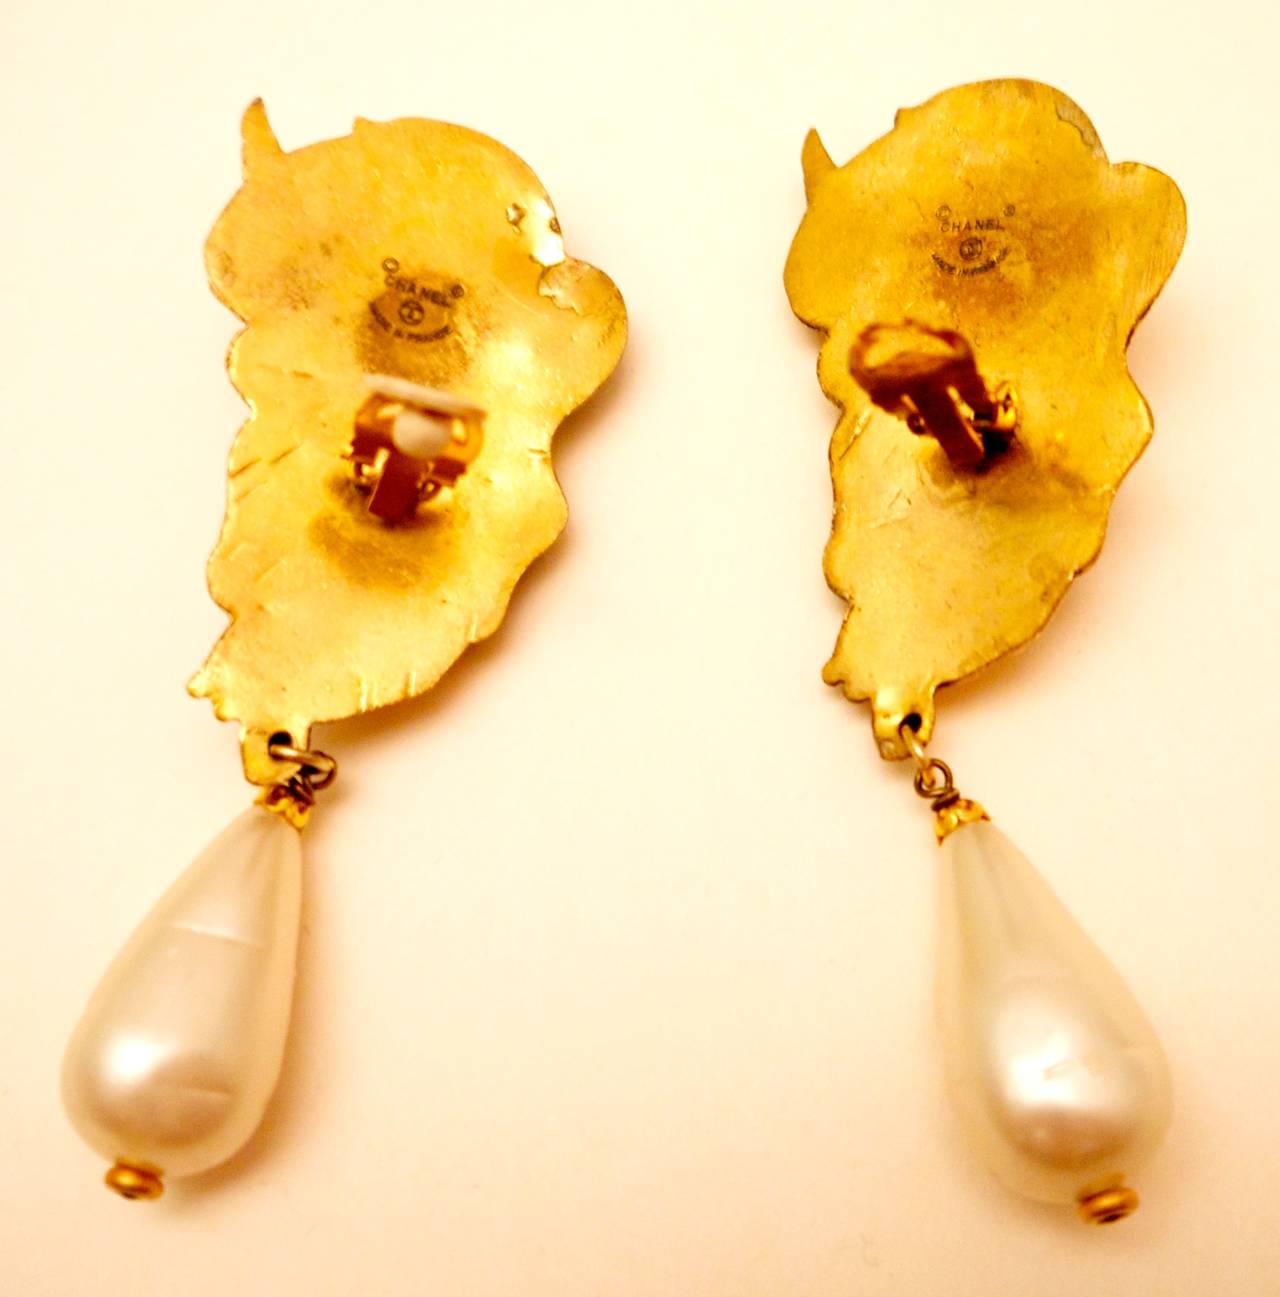 These magnificent Chanel cupid earrings are highly collectible and extremely rare. In all my years collecting Chanel jewelry this is the second time I've ever seen these earrings available for sale. They are from the late 1970's. 

The cupids are